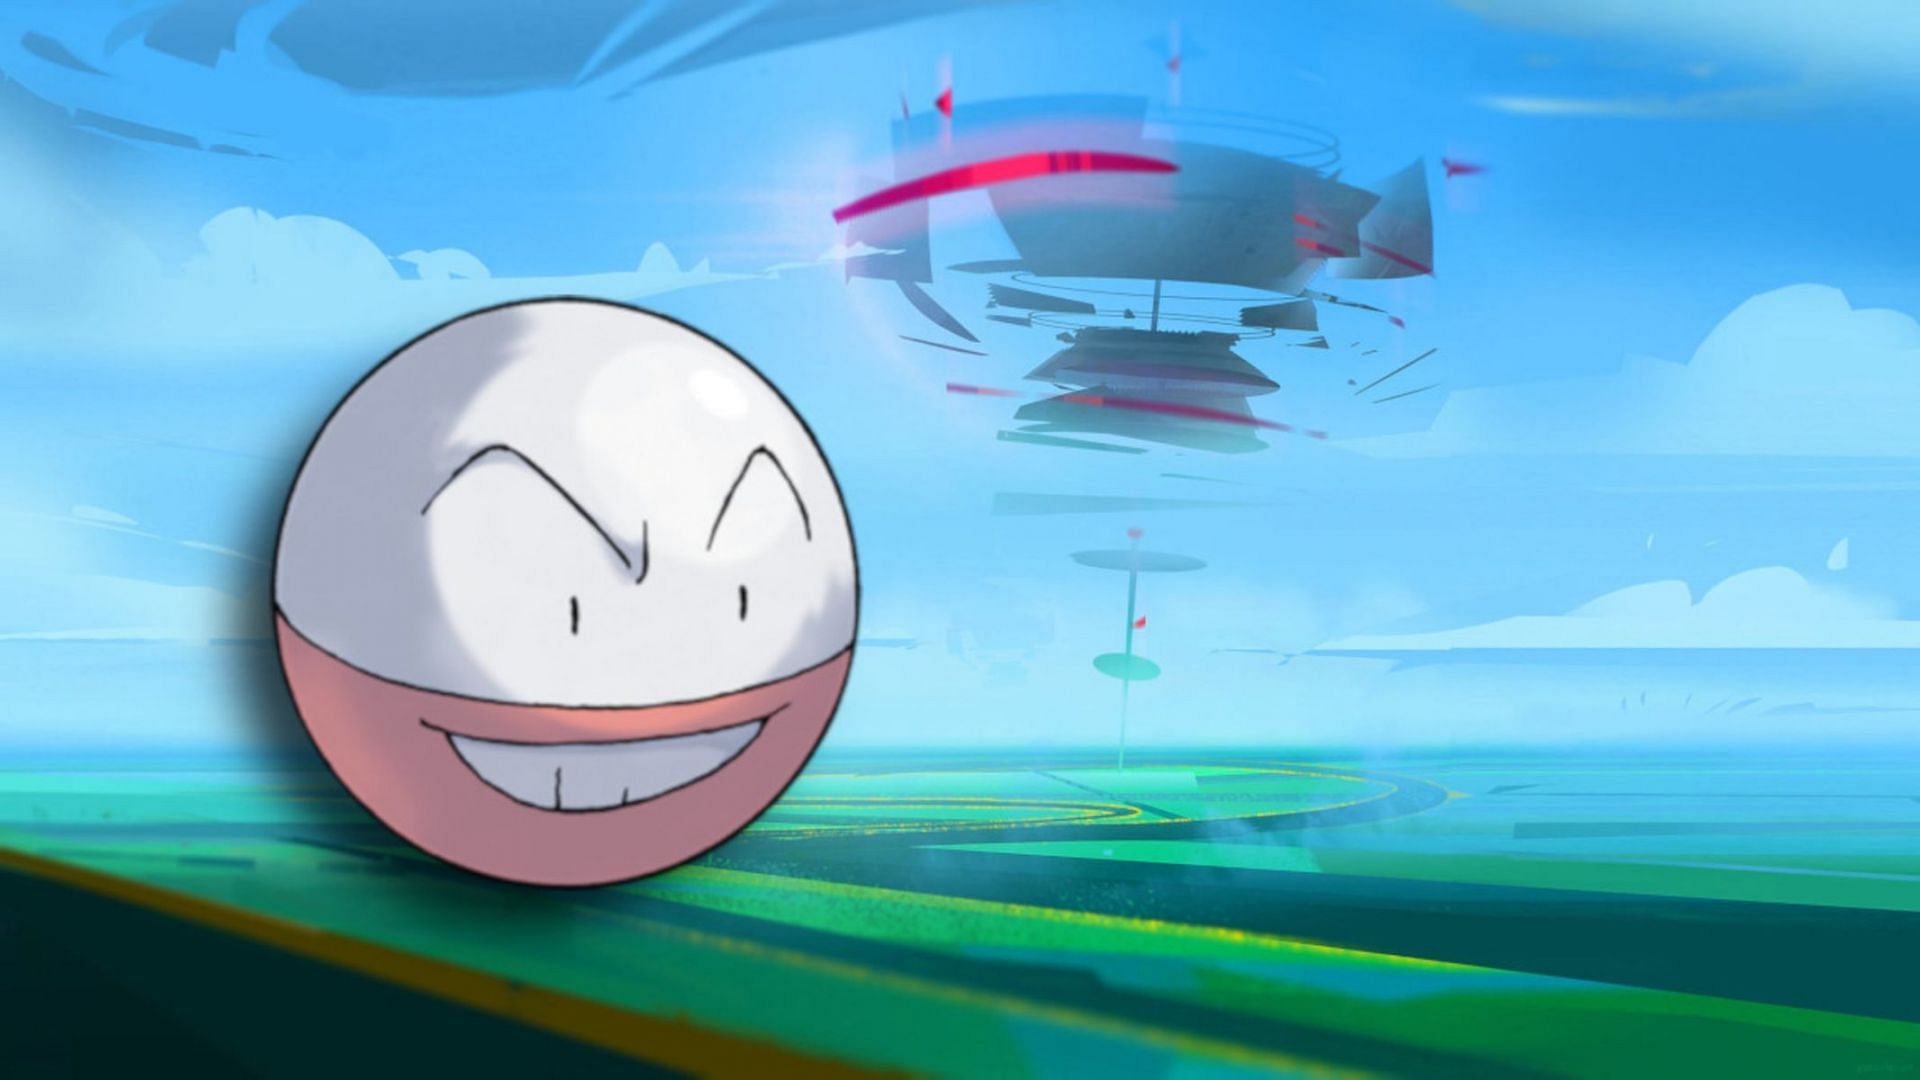 Electrode is an Electric-type originally hailing from Generation I (Image via Niantic)